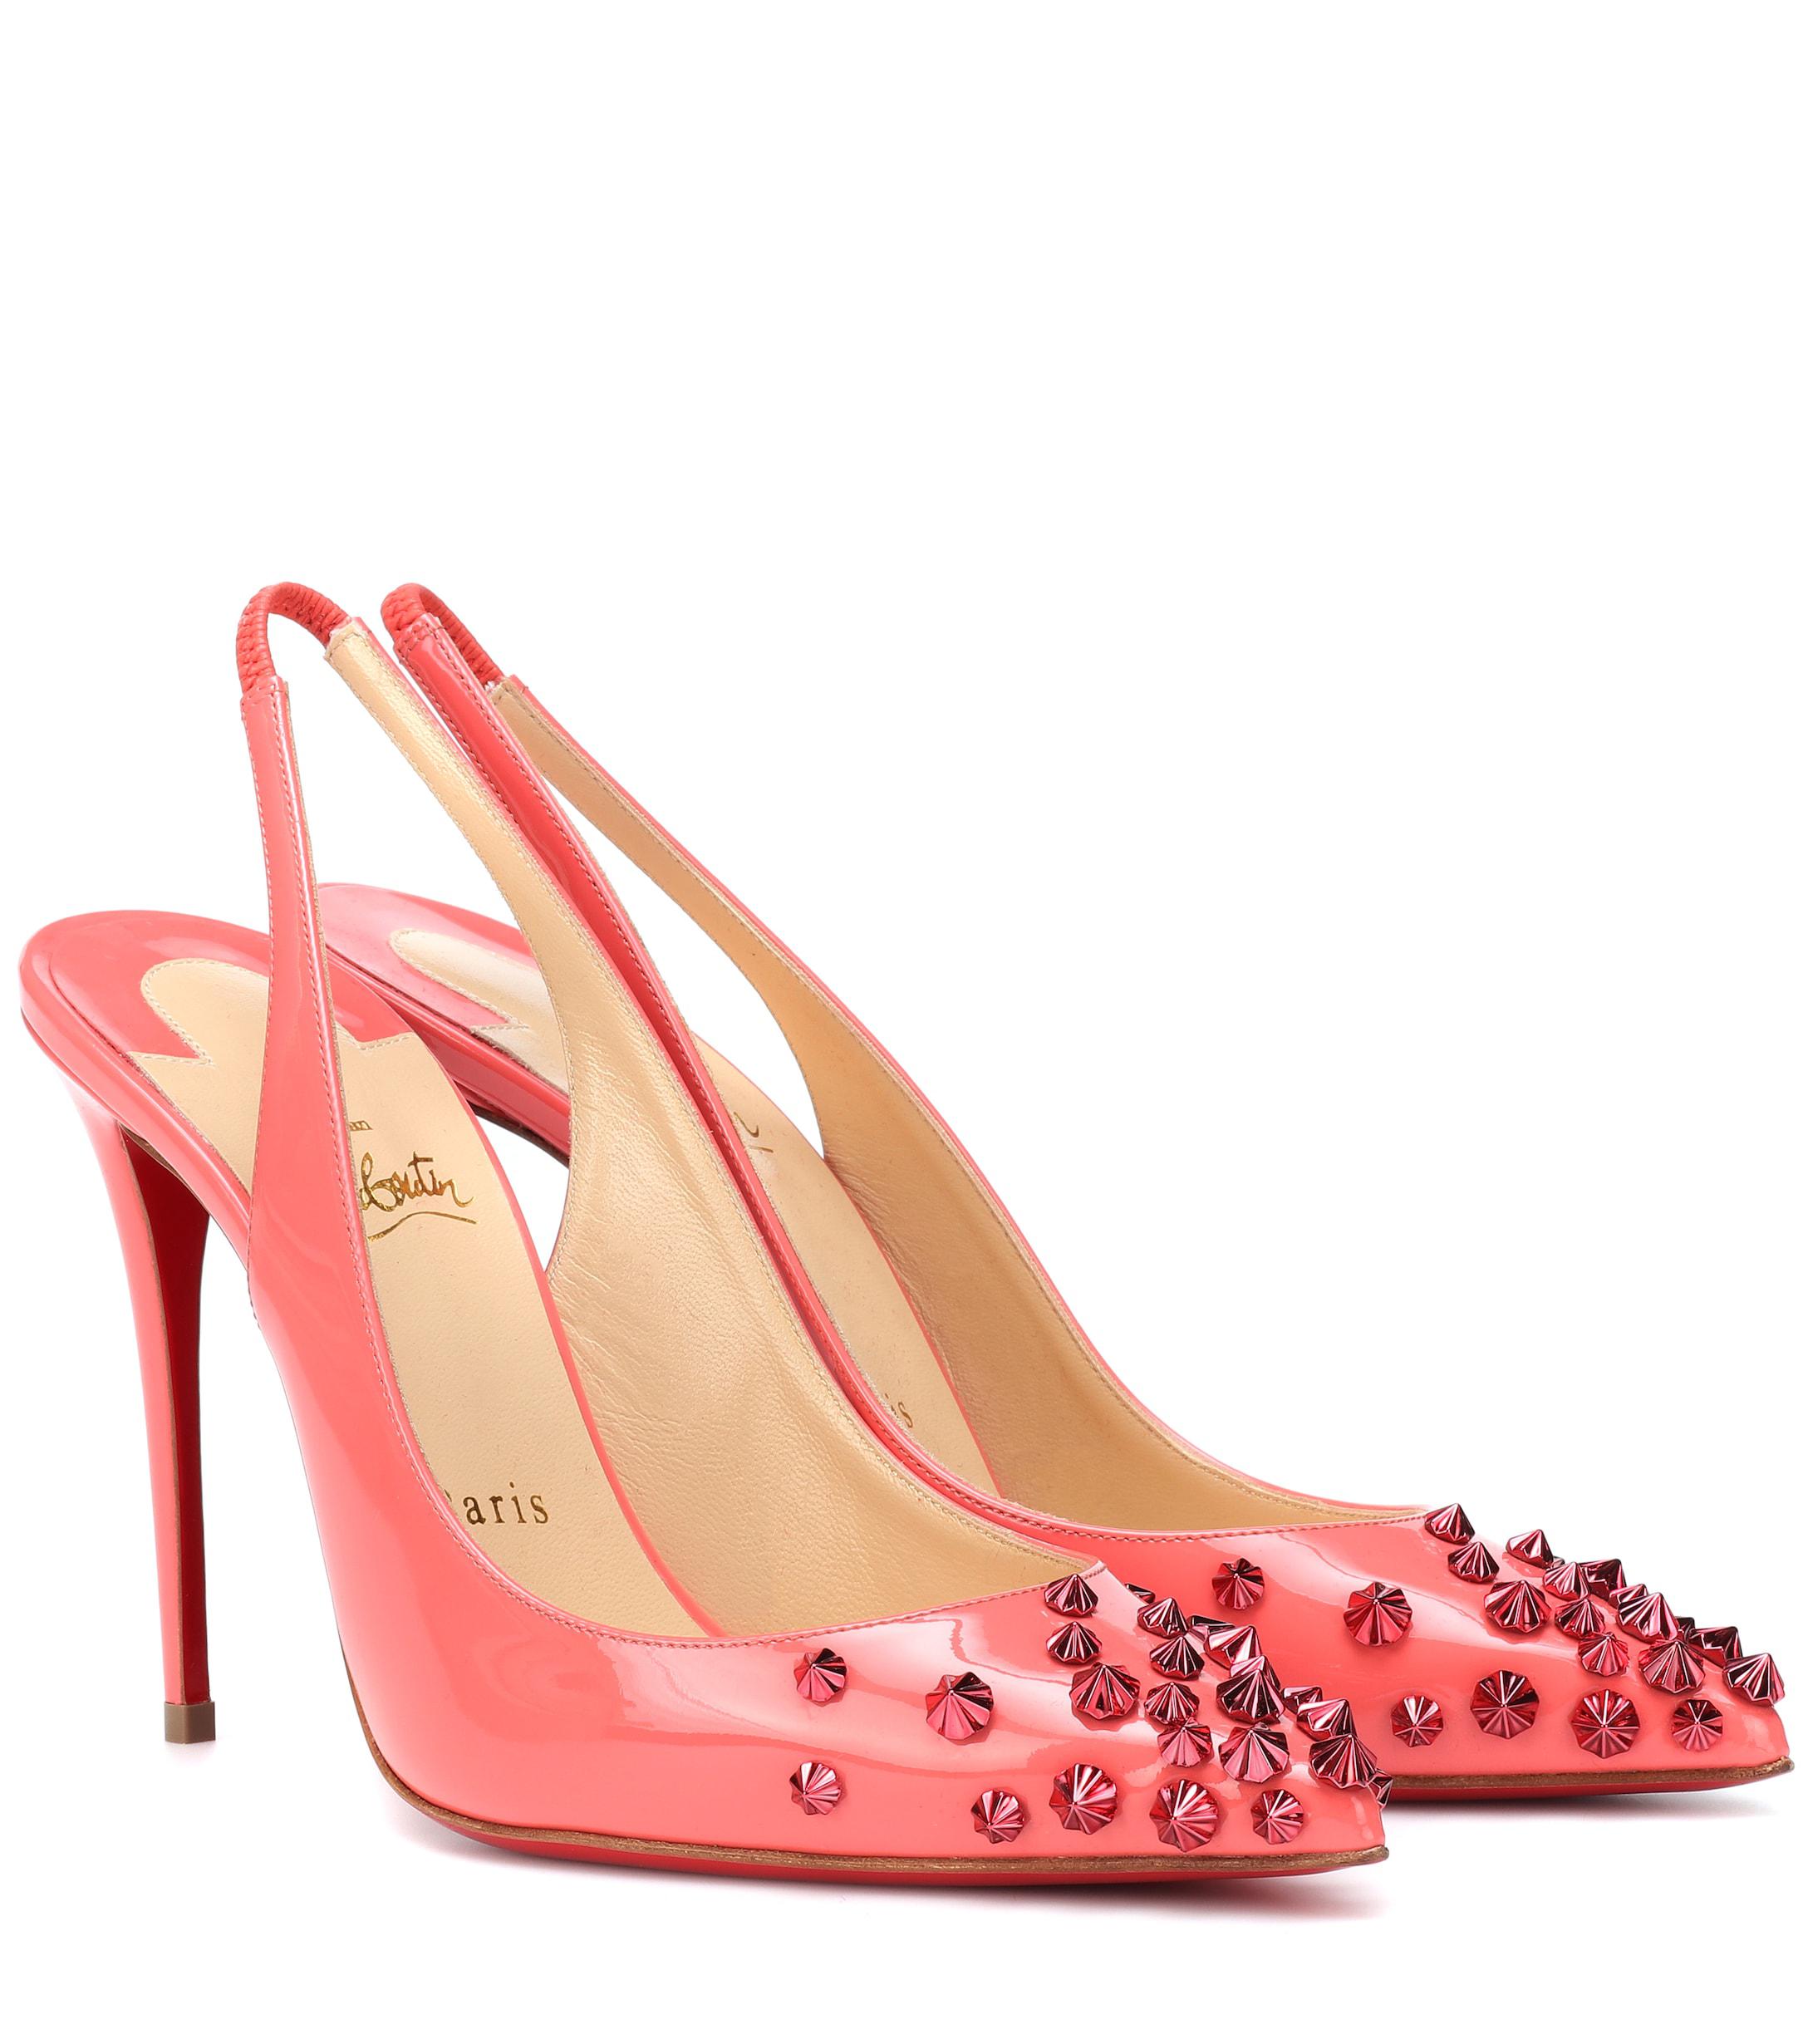 Christian Louboutin Drama Sling 100 Patent Leather Pumps in Pink | Lyst